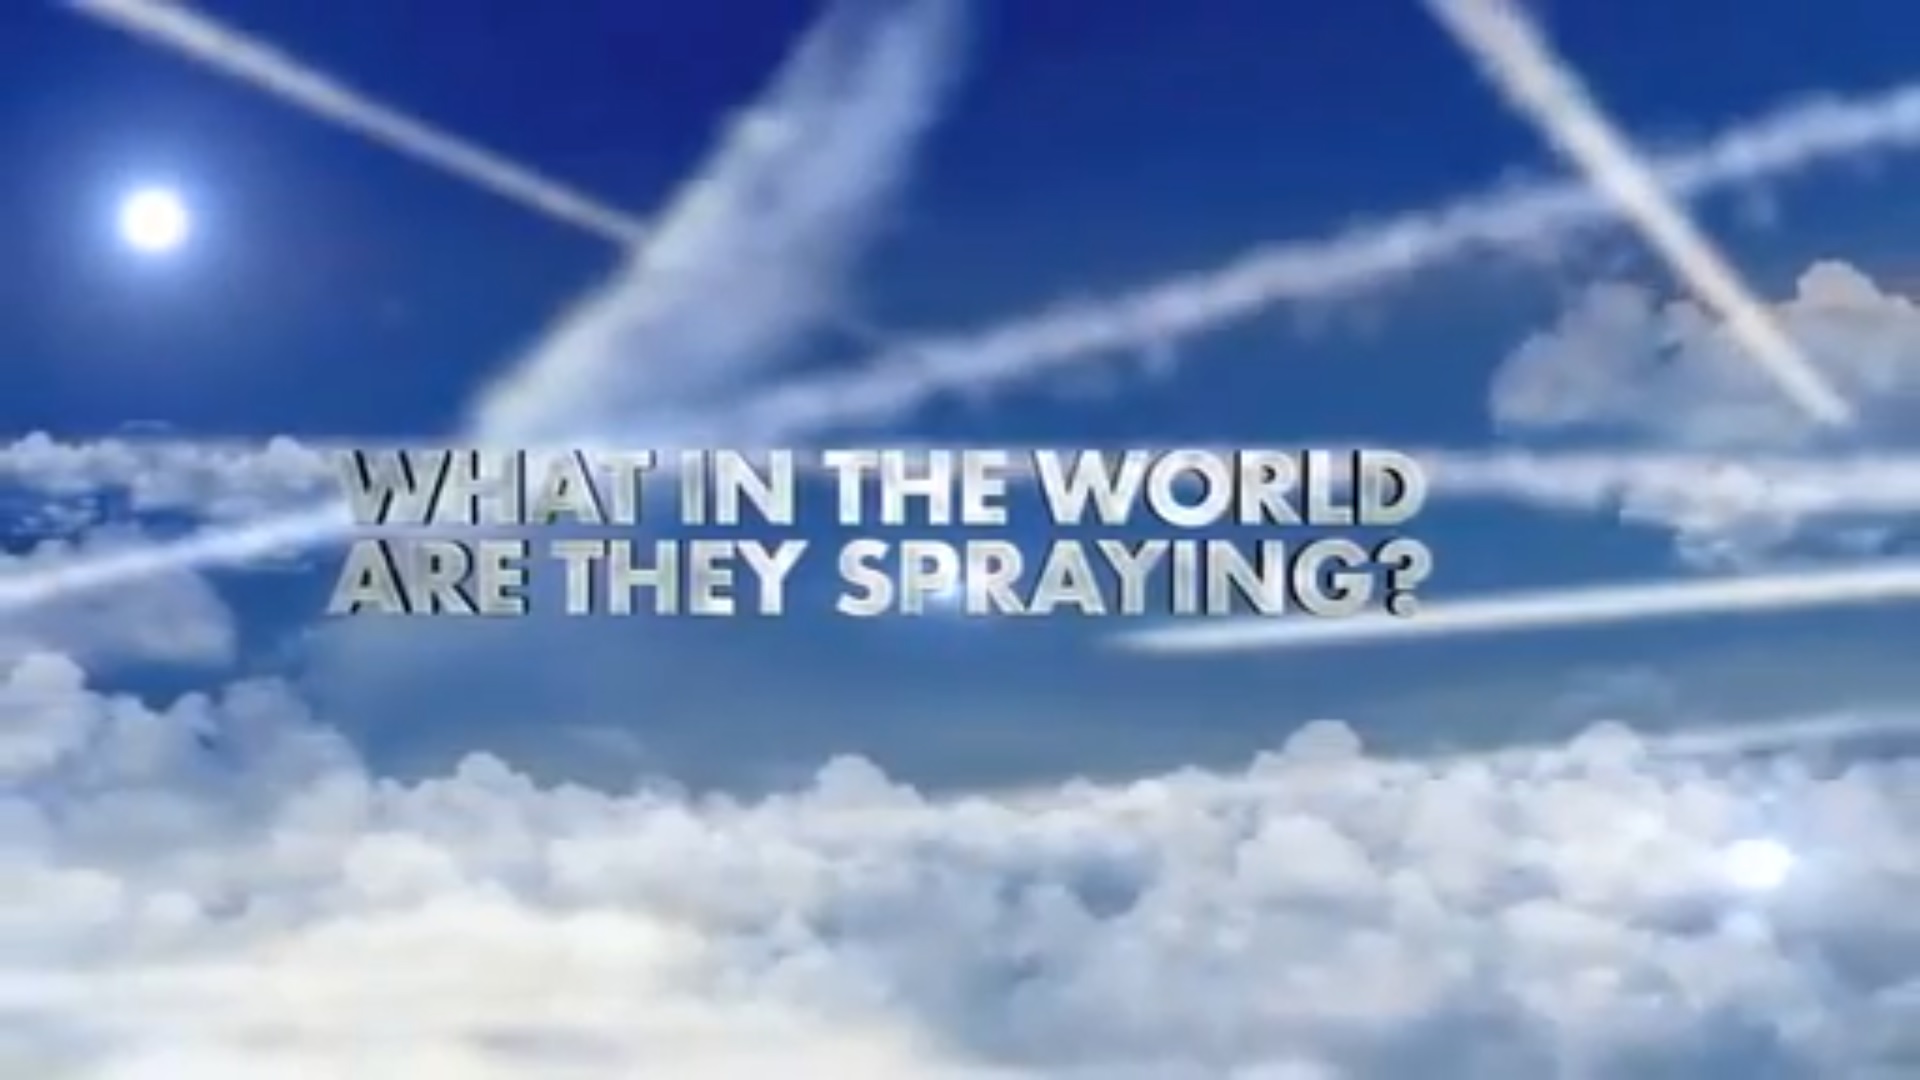 What in the world are they spraying - Nederlands ondertiteld